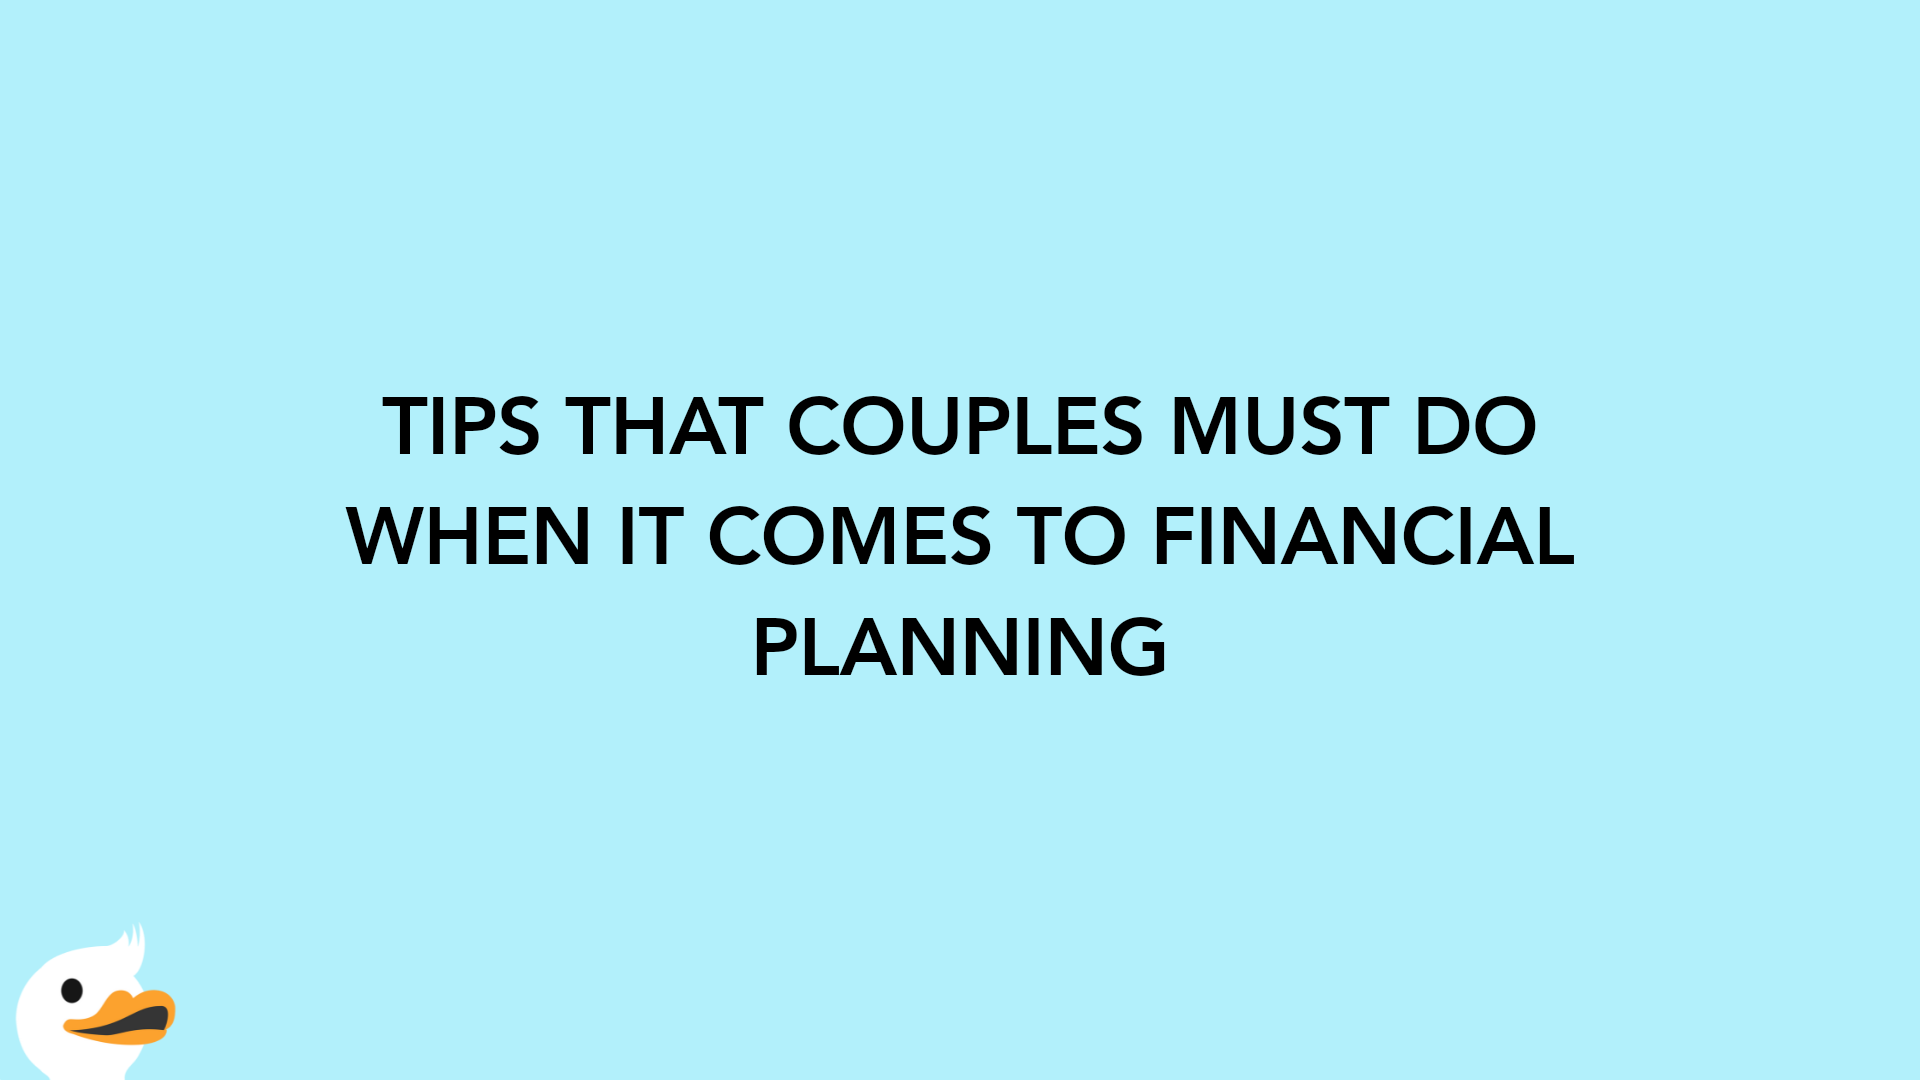 TIPS THAT COUPLES MUST DO WHEN IT COMES TO FINANCIAL PLANNING